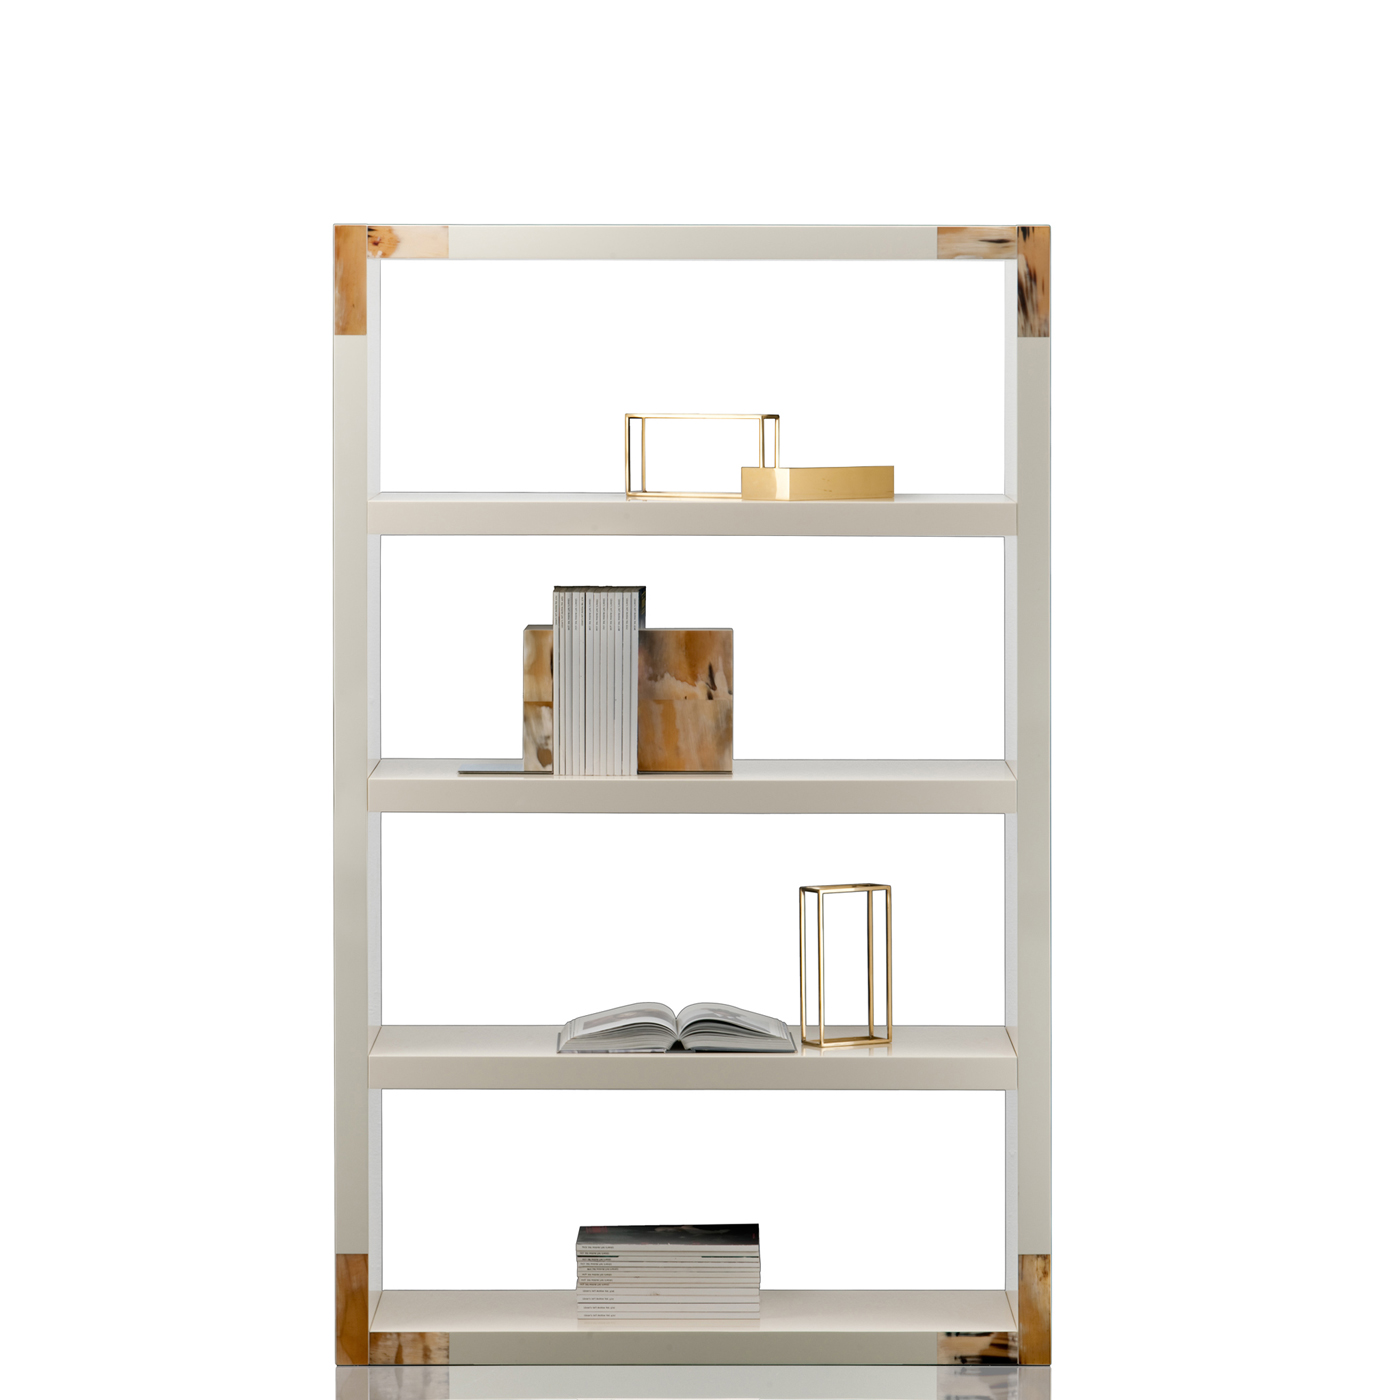 Cabinets and bookcases - Frida bookcase in glossy ivory lacquered wood - Arcahorn